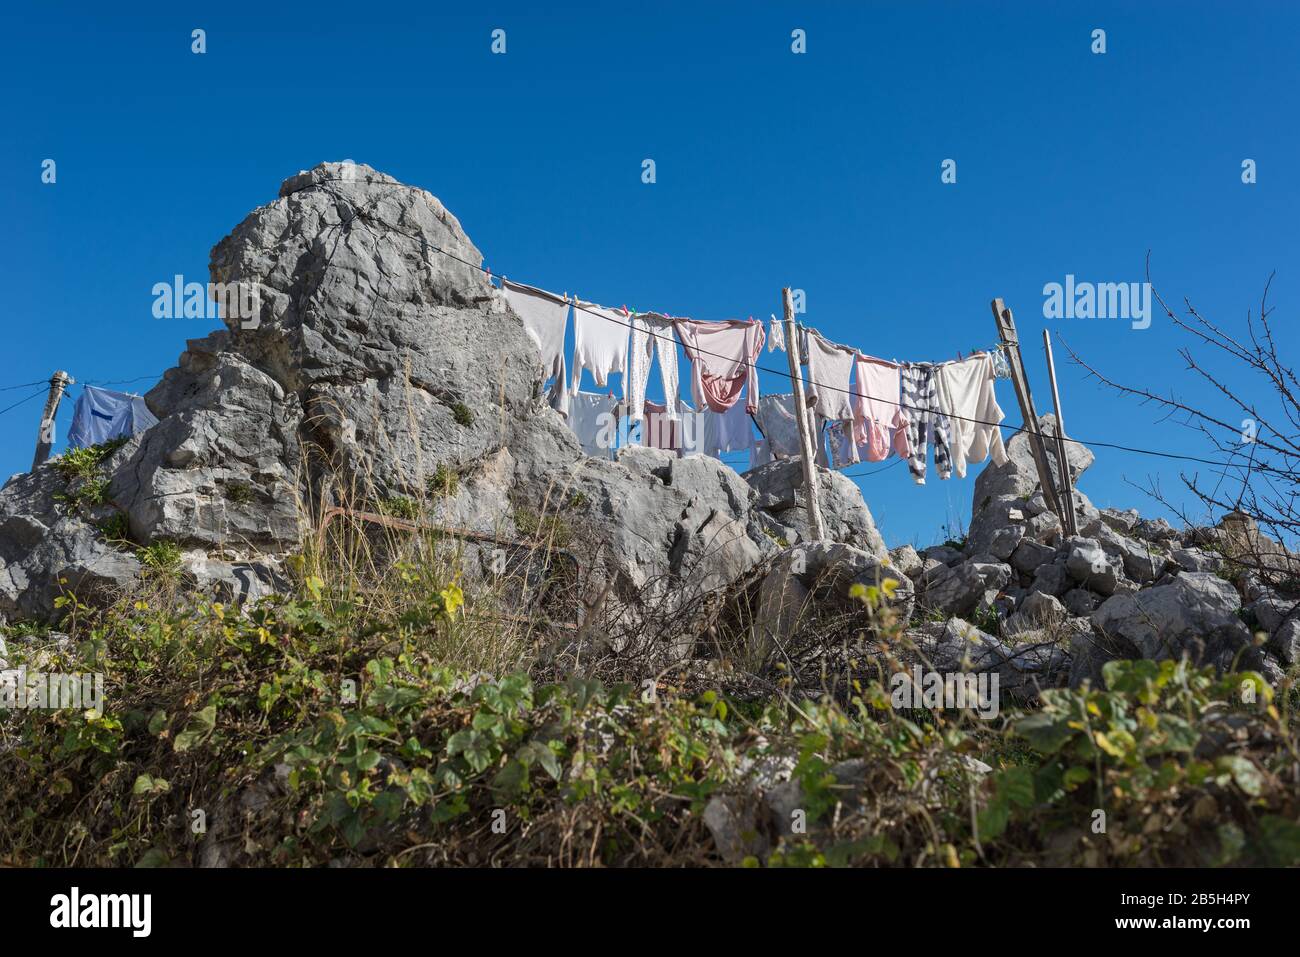 Clothes hanging on to dry on a clothesline built on a rock in a rural town in southern Spain. Stock Photo